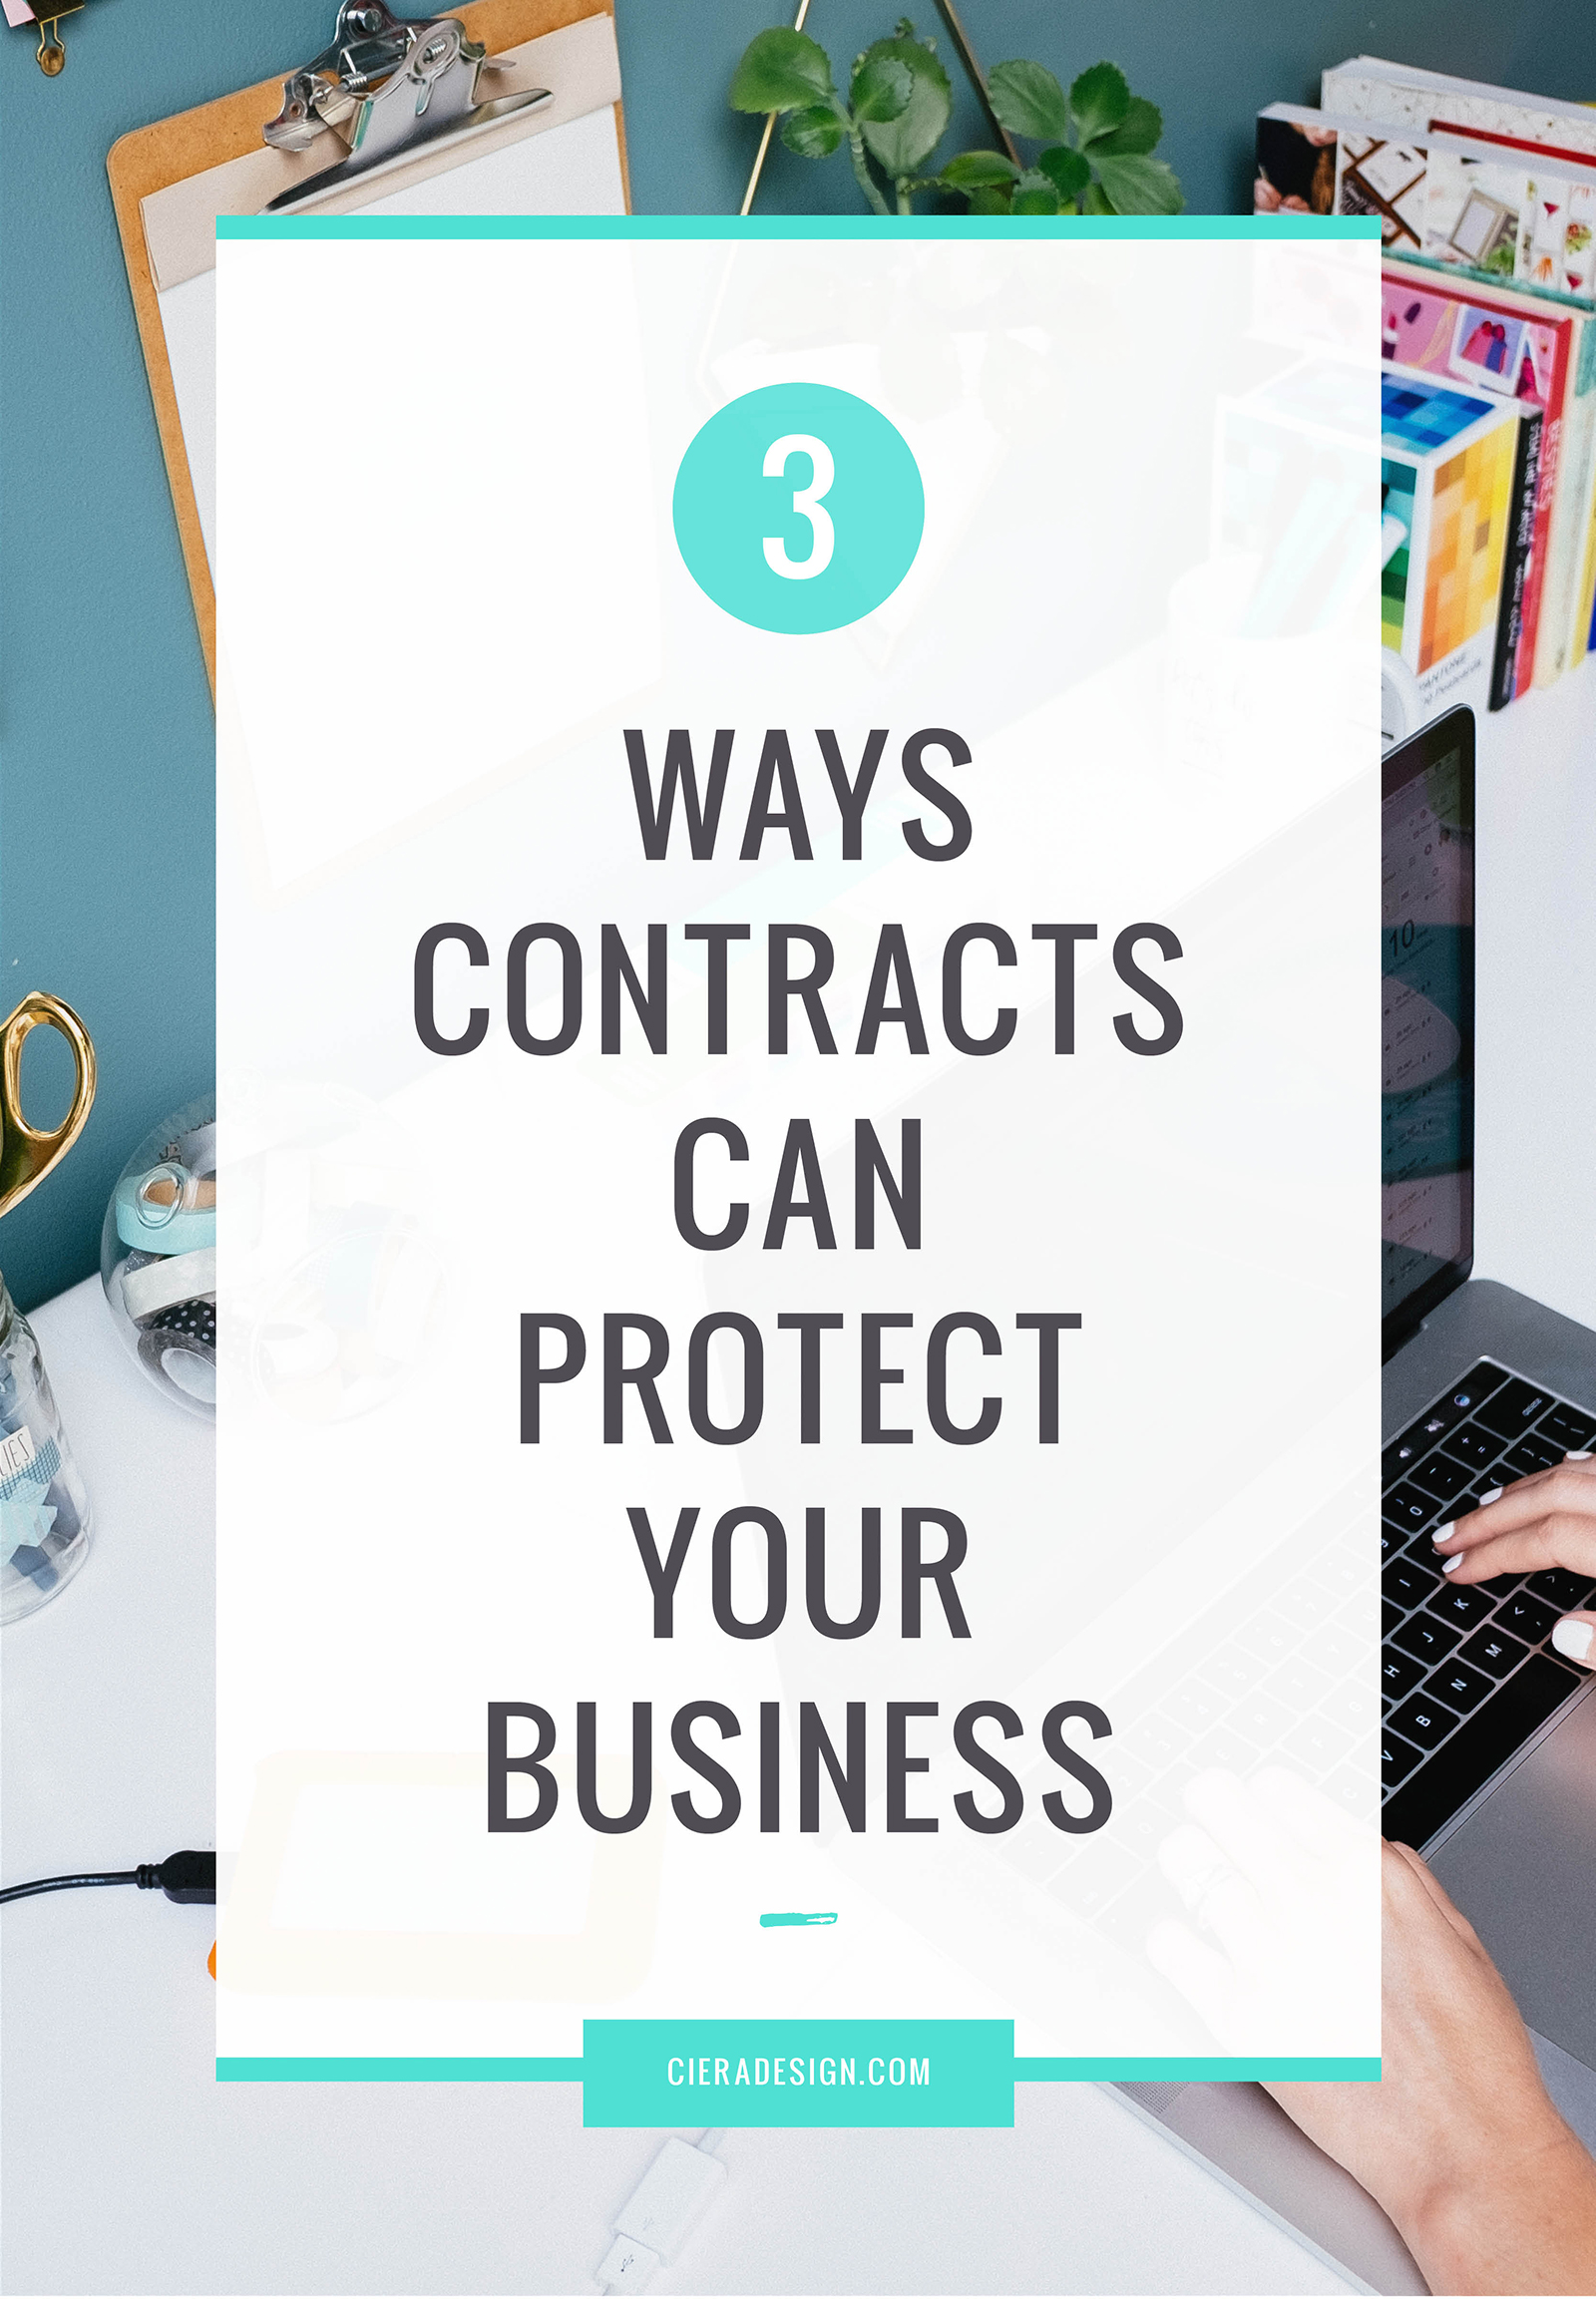 If you're not sure about whether contracts are worth the investment, here are 3 ways a sturdy contract can protect you.